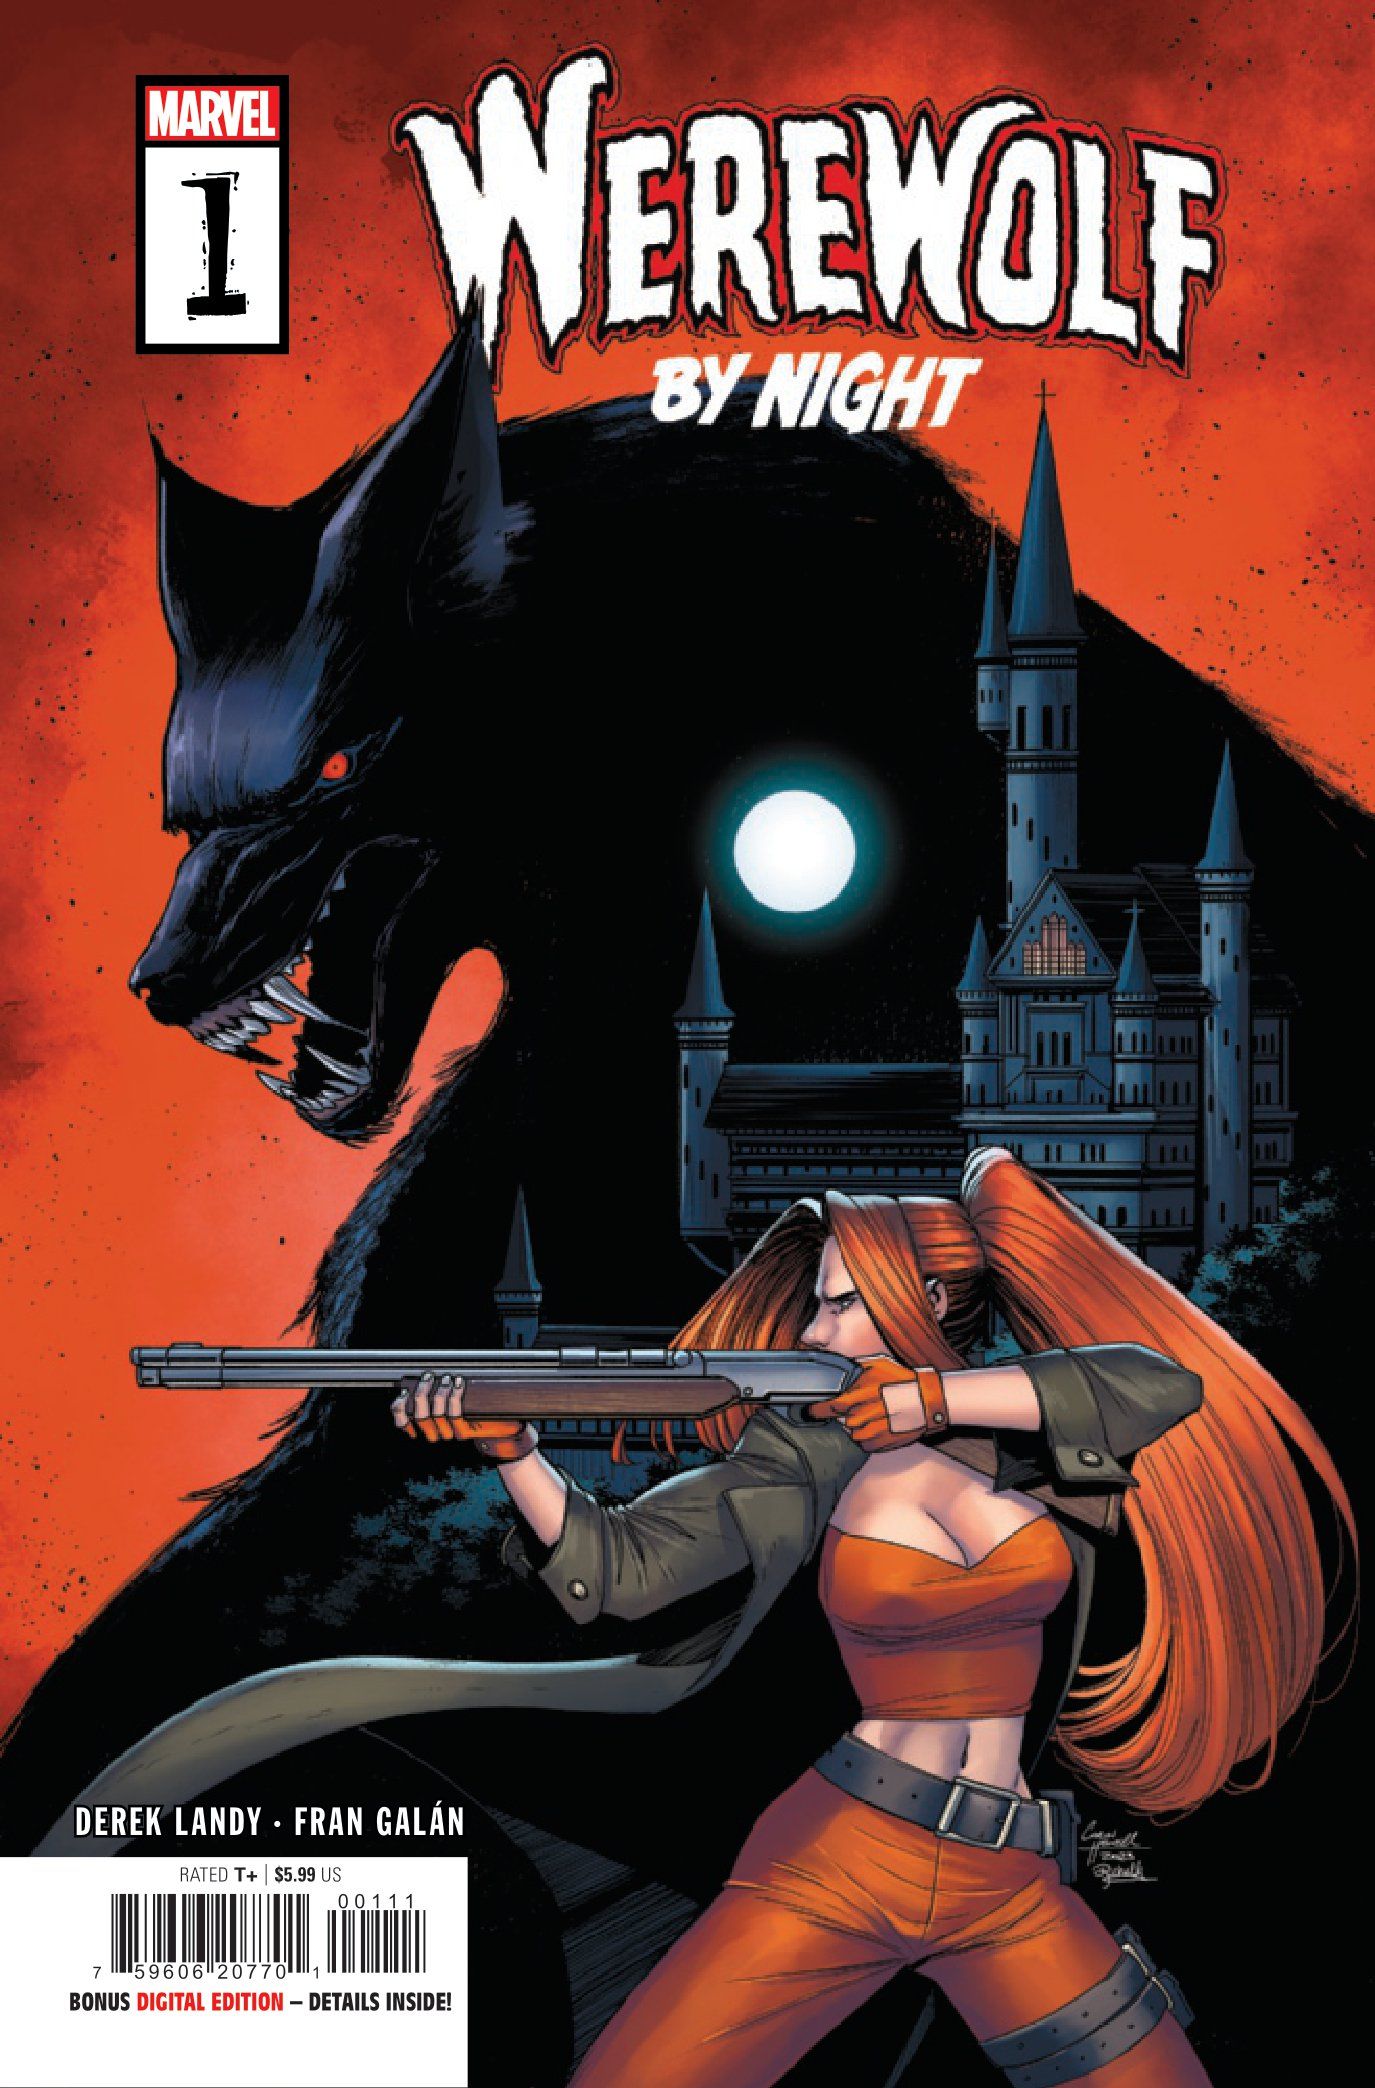 Werewolf By Night #1 ACover by Corin Howell and Rachelle Rosenberg